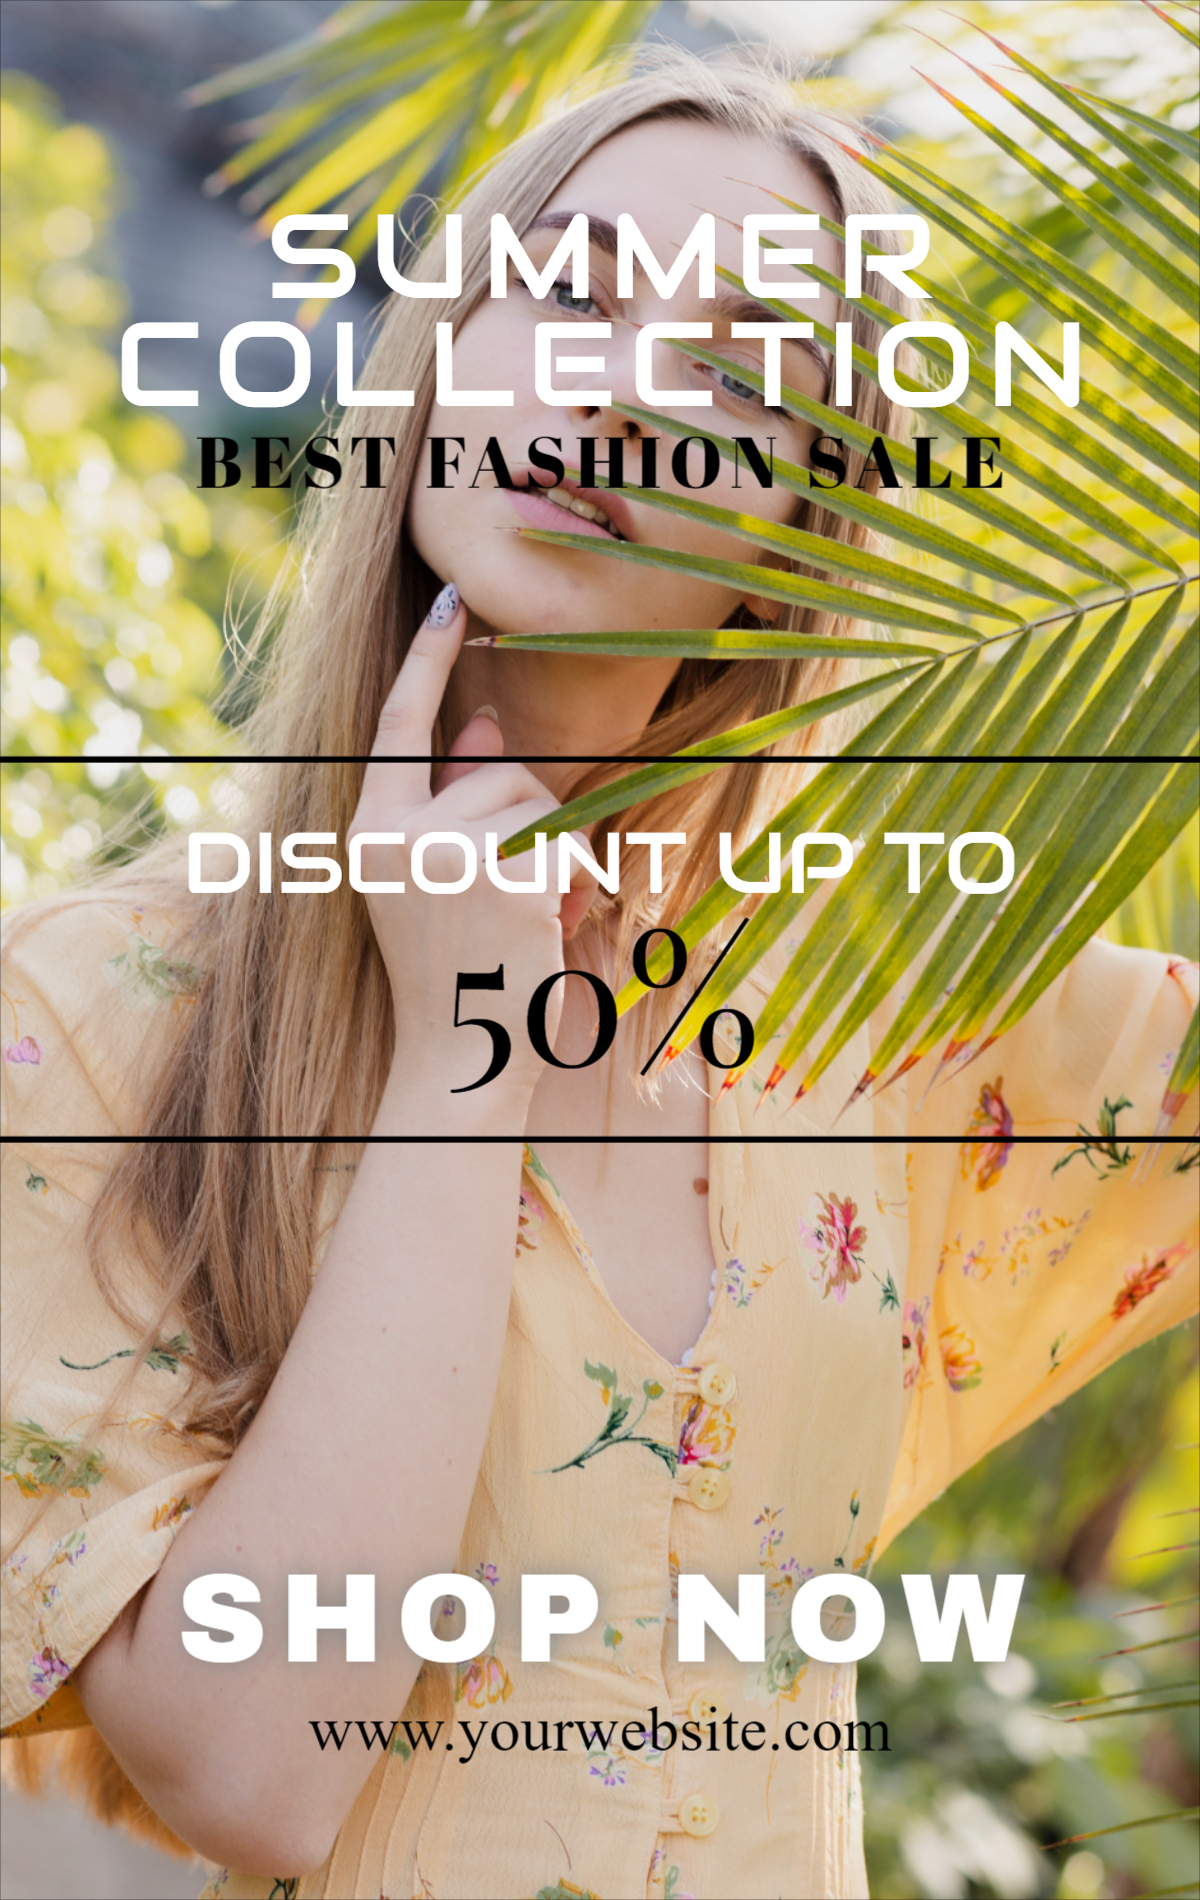 Summer Collection Fashion Sale poster design download for free